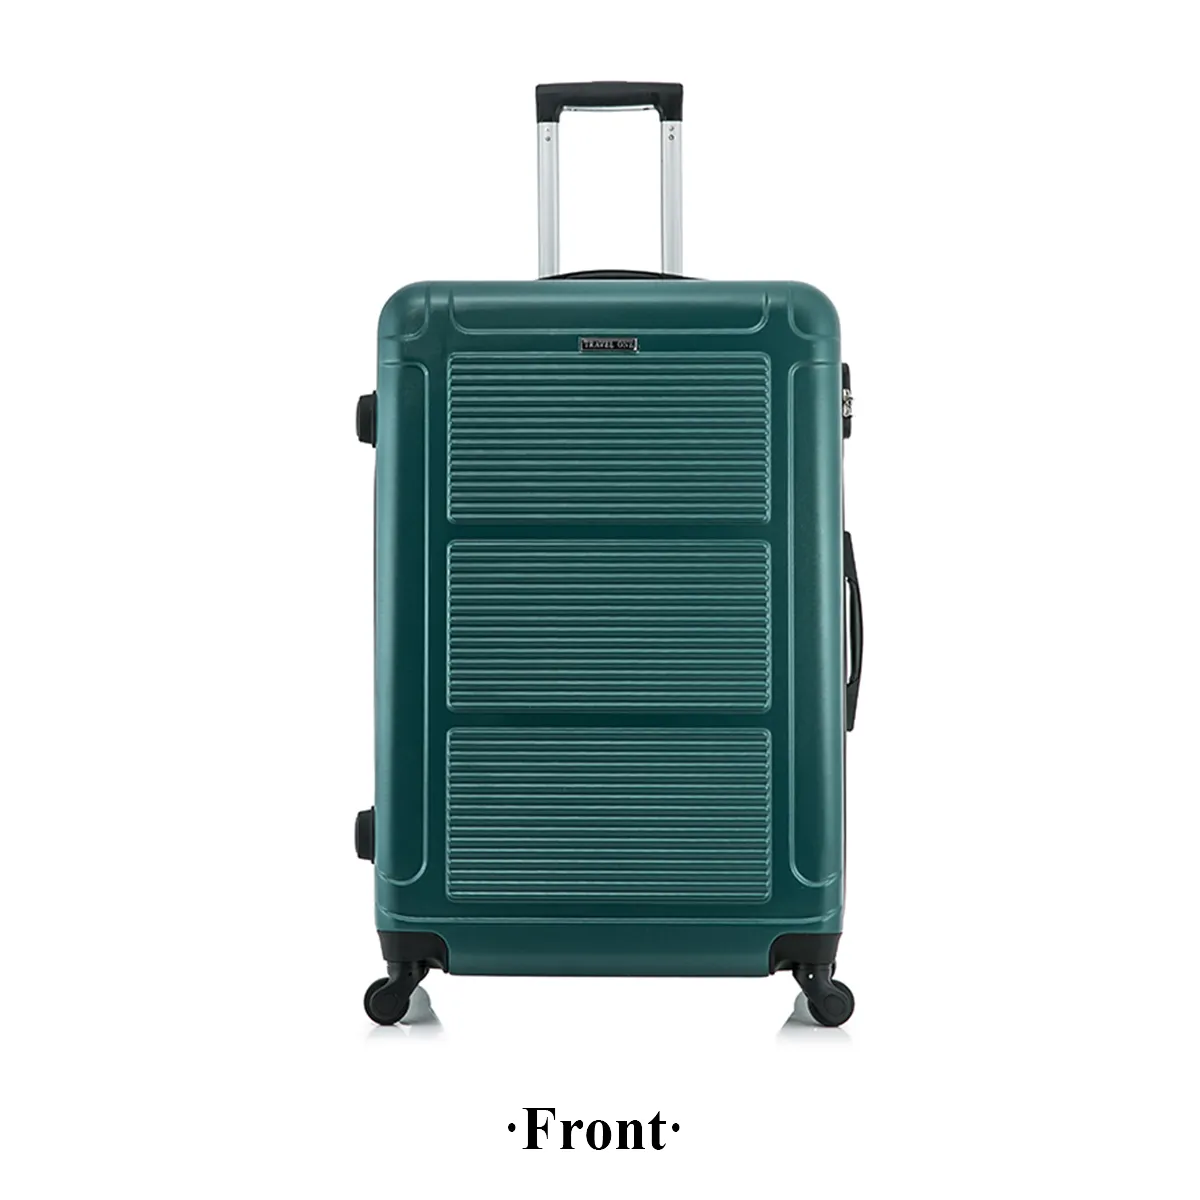 ABS LUGGAGE TRAVEL TROLLEY FASHIONABLE STRONG  DURABLE SUITCASE